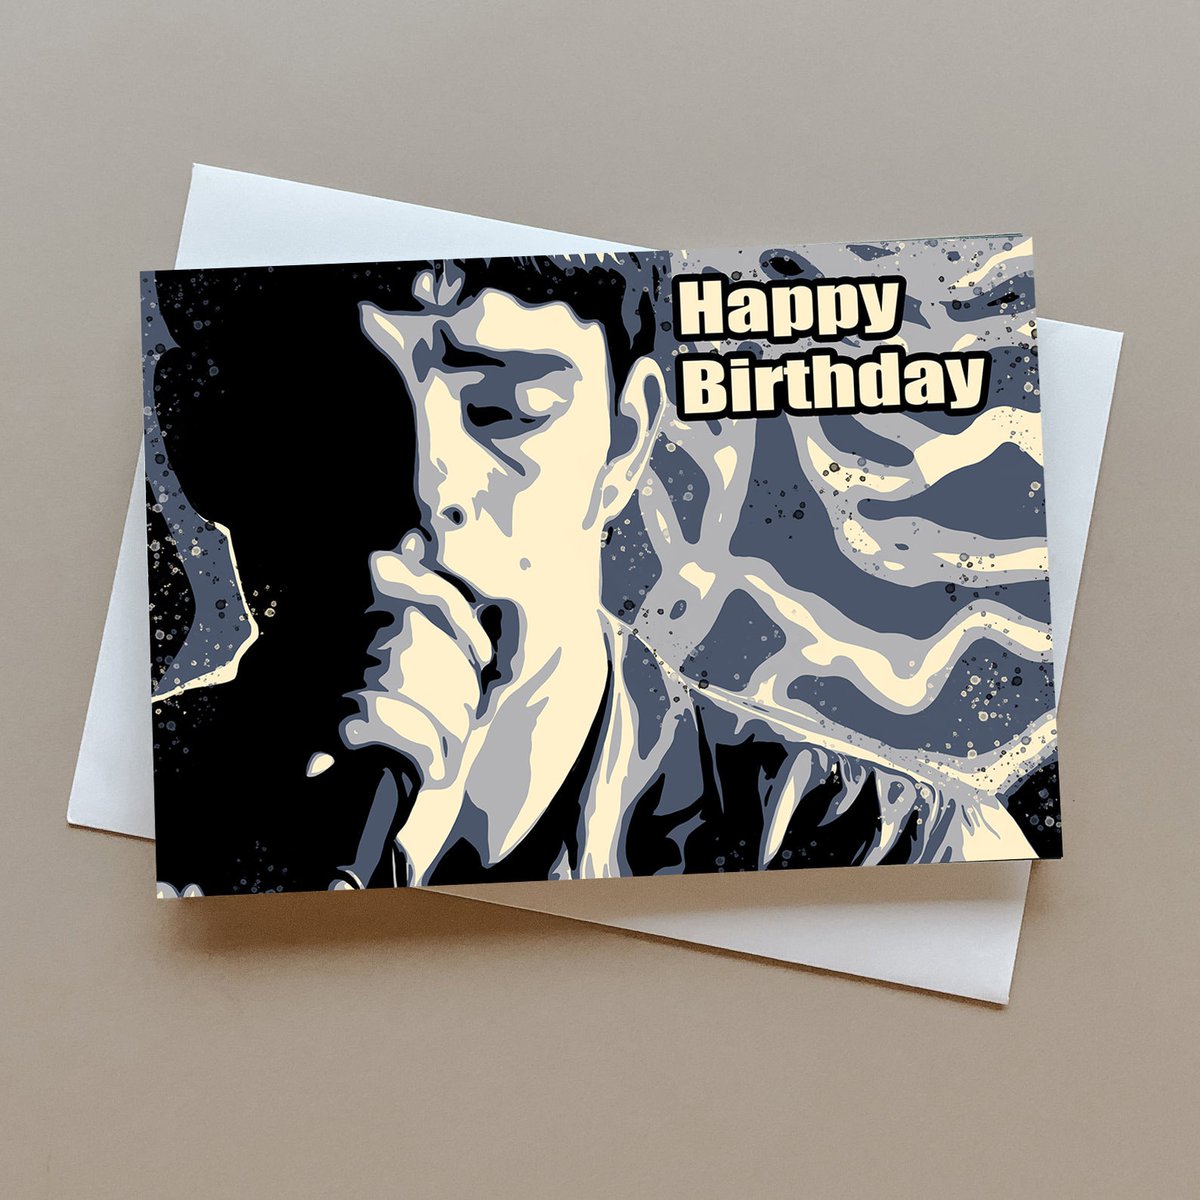 Ian Curtis birthday card, greeting card for Joy Division fans, music birthday gift, post punk card, Unknown Pleasures tuppu.net/3d349a7c #Artwork #GiftIdeas #GreetingCards #UnknownPleasures